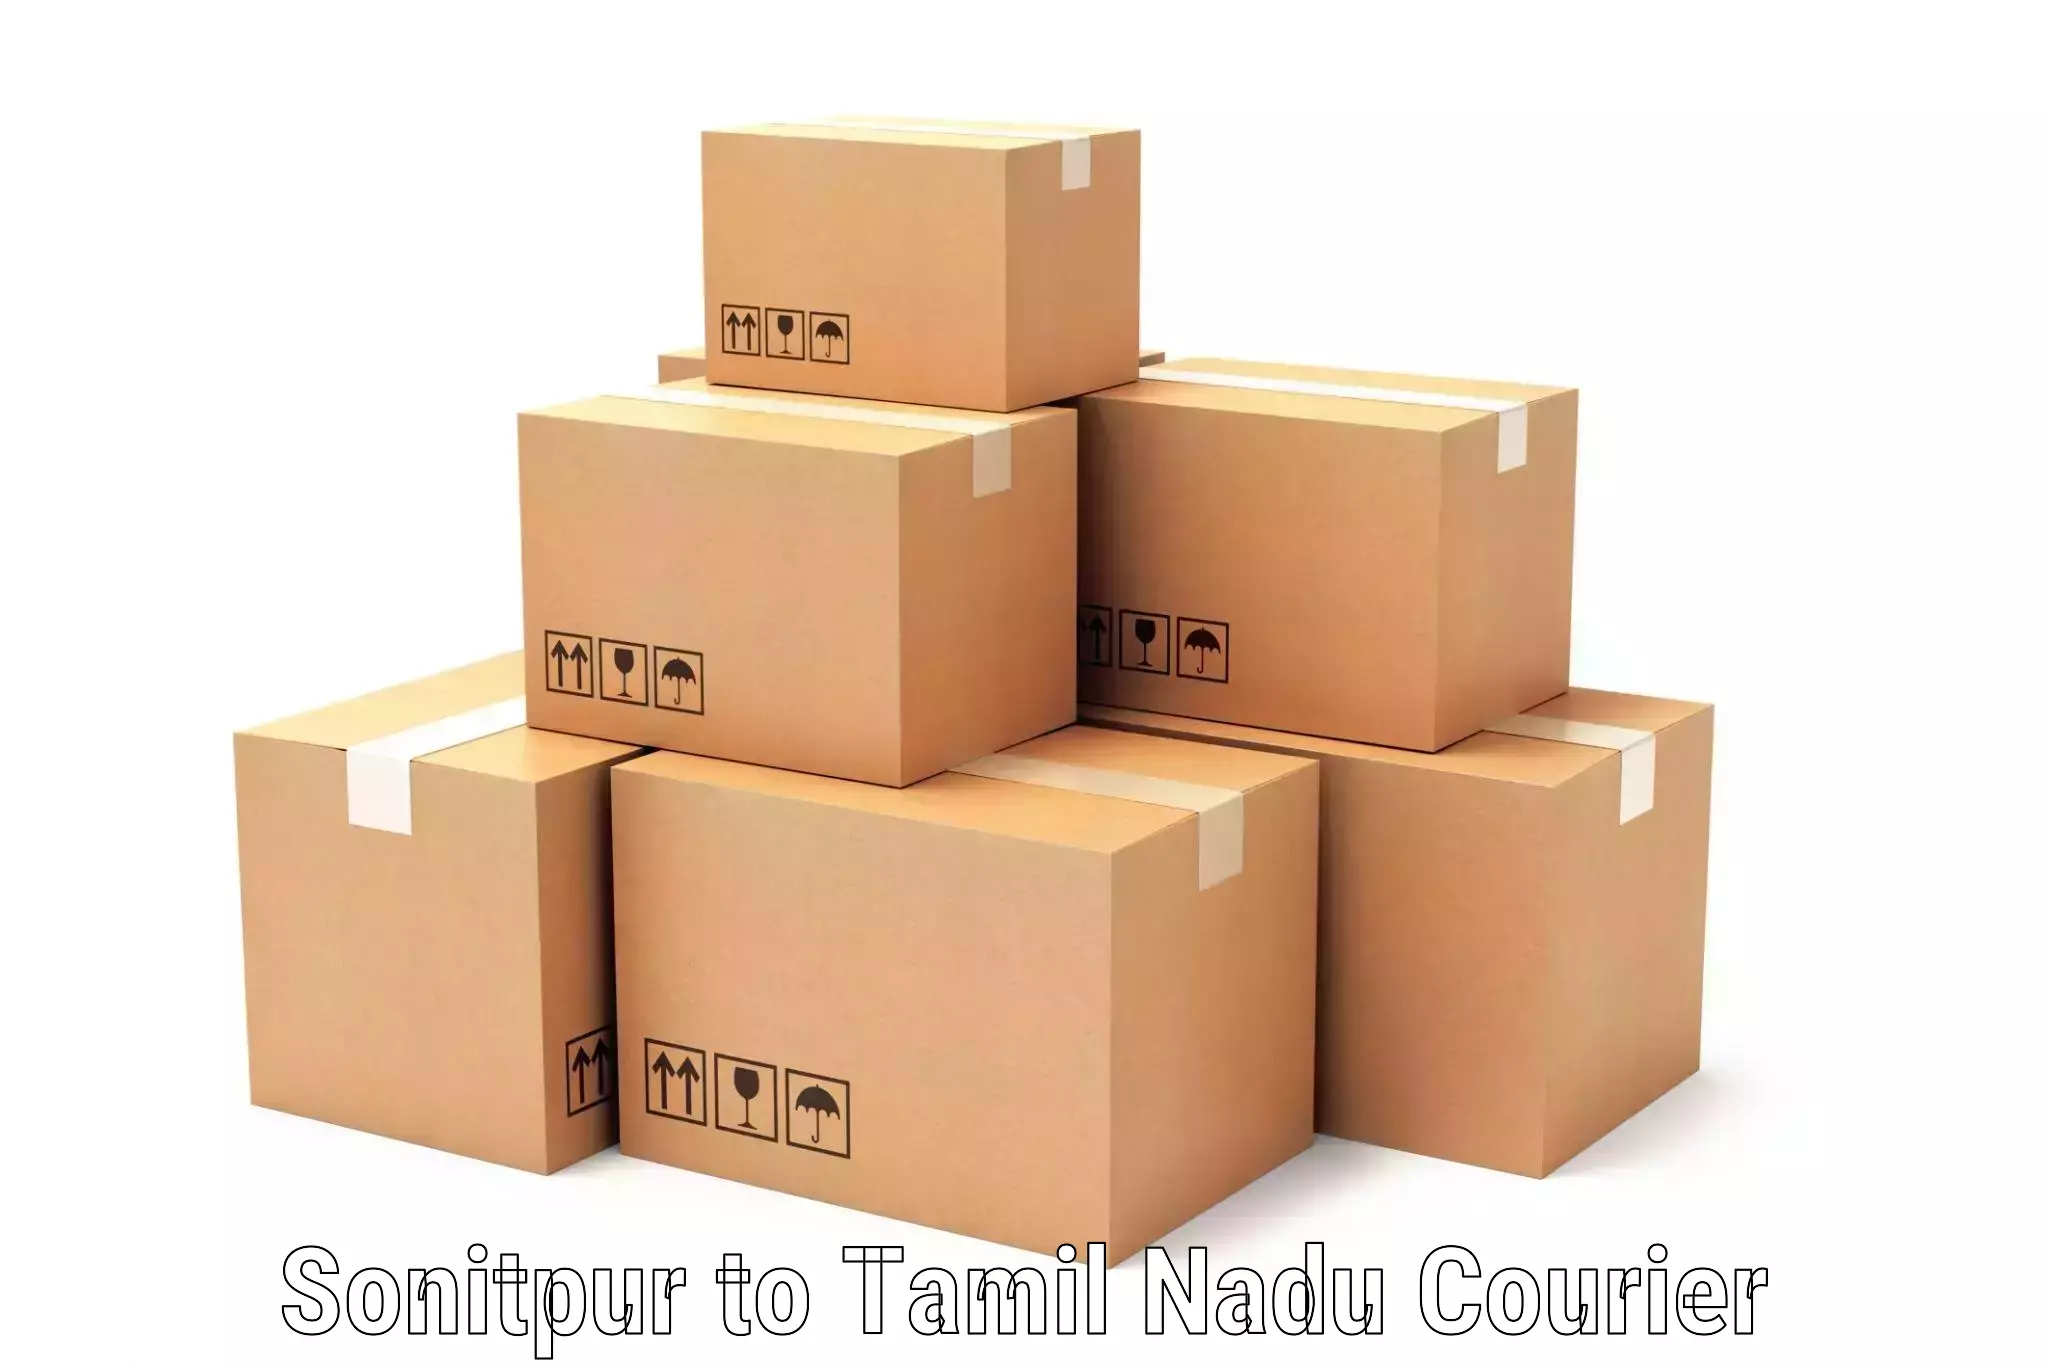 Efficient shipping operations Sonitpur to Tamil Nadu